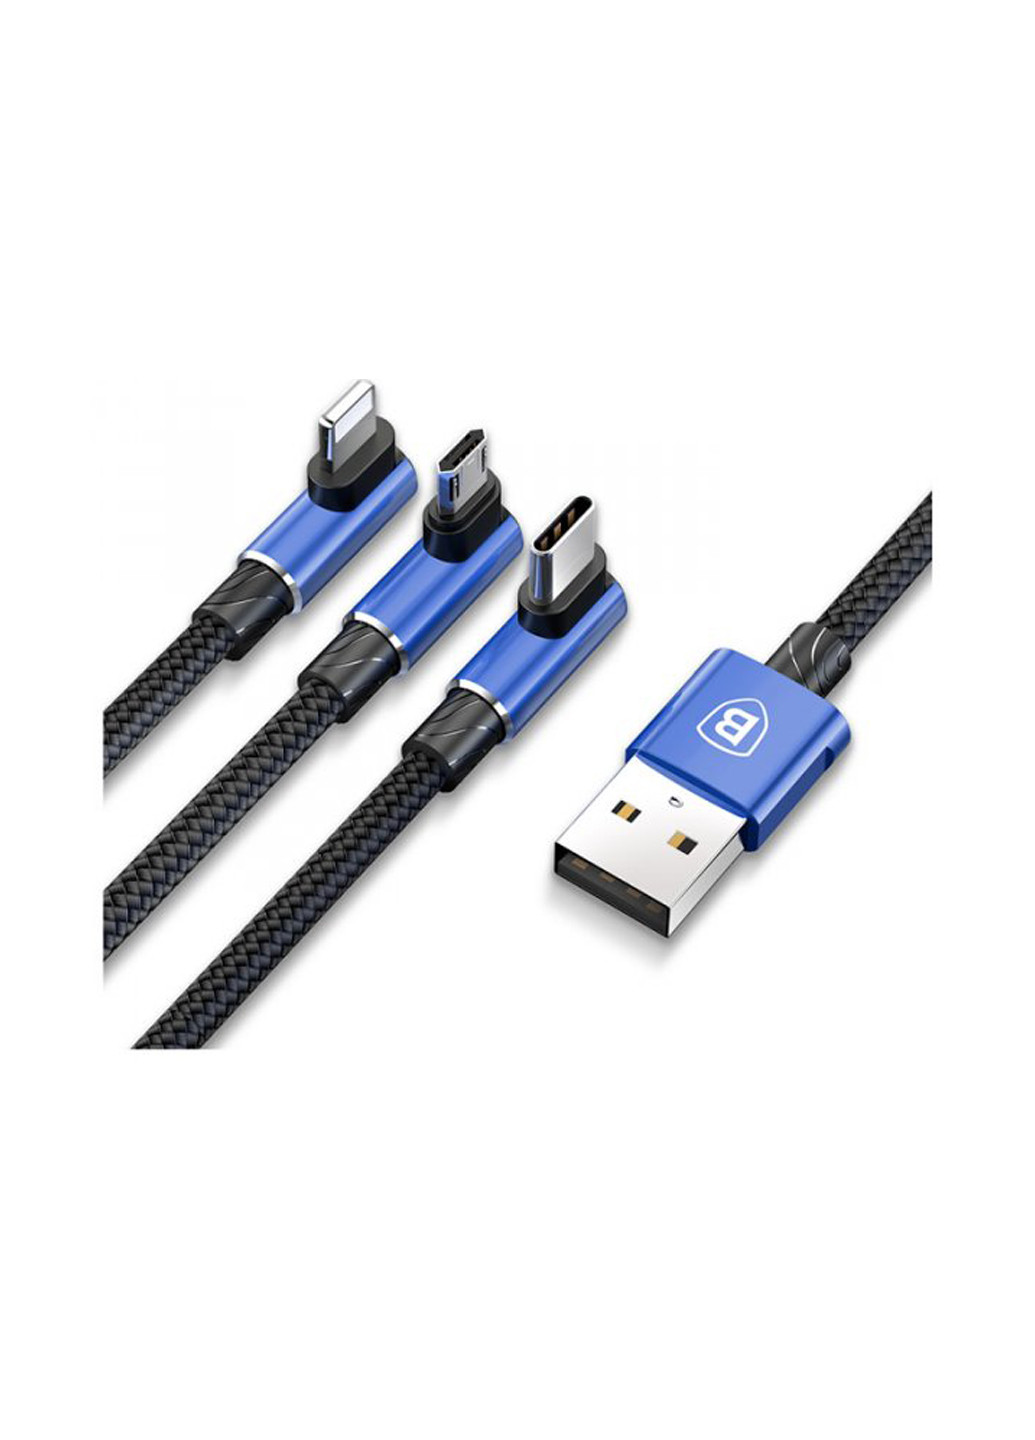 Кабель 3.5A 1.2M Blue (CAMLT-WZ03) Baseus mvp 3 in 1 mobile game cable usb for m+l+t (135000210)